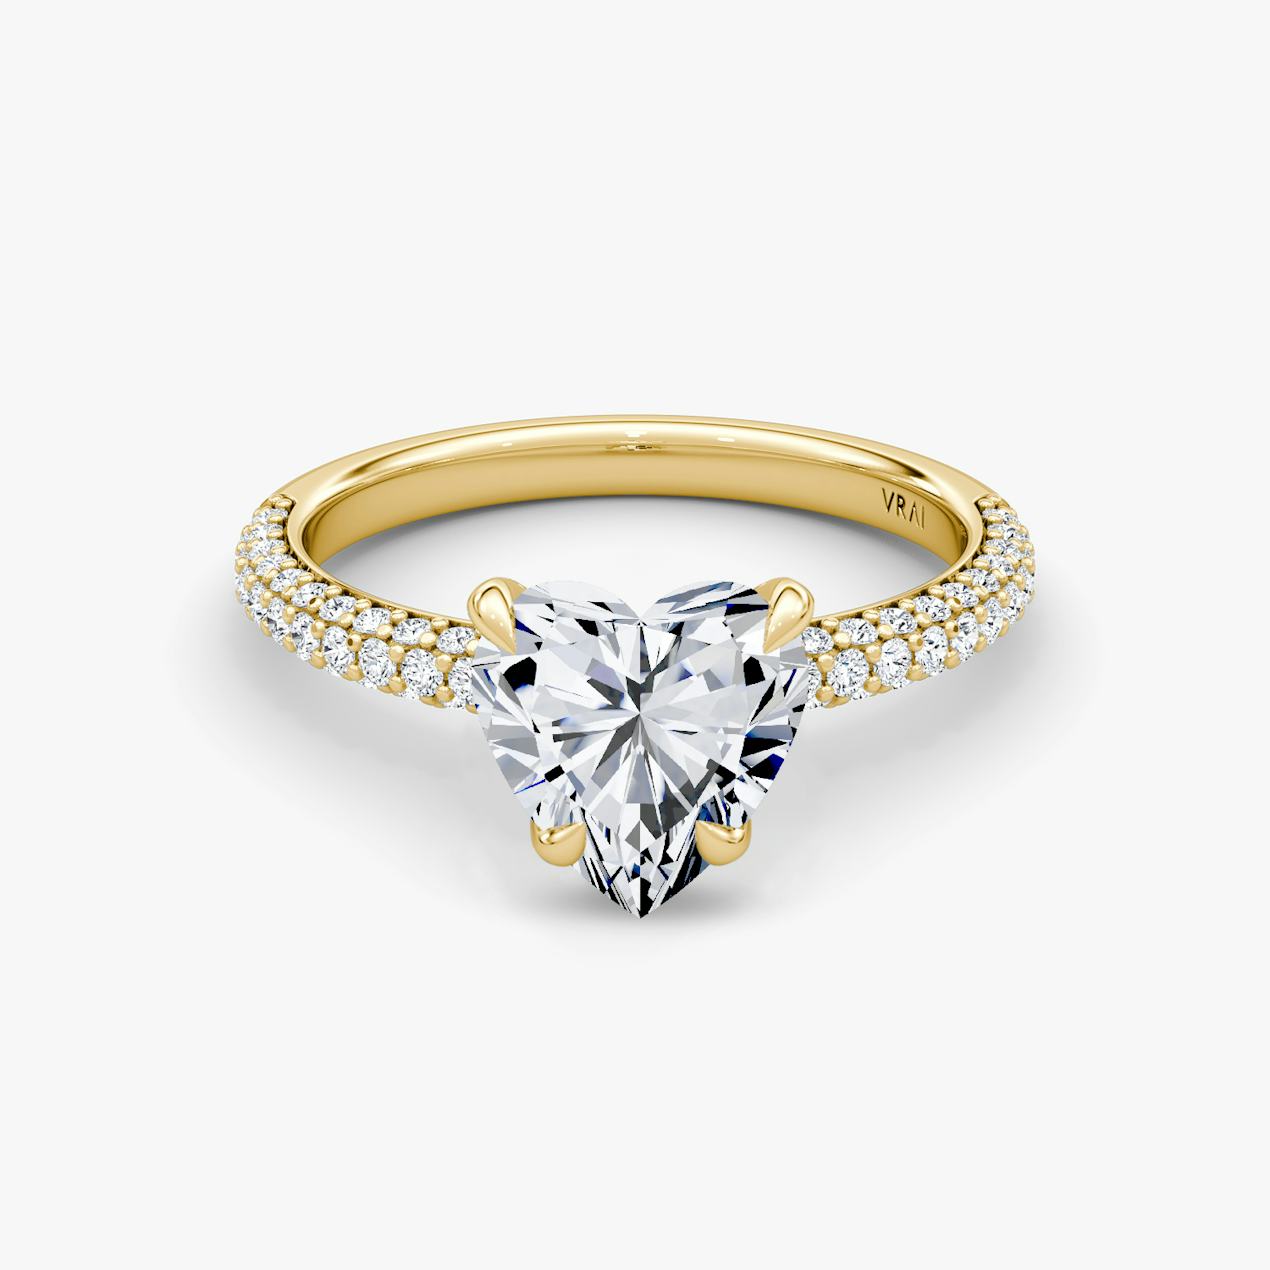 The Pave Dome Heart Ring